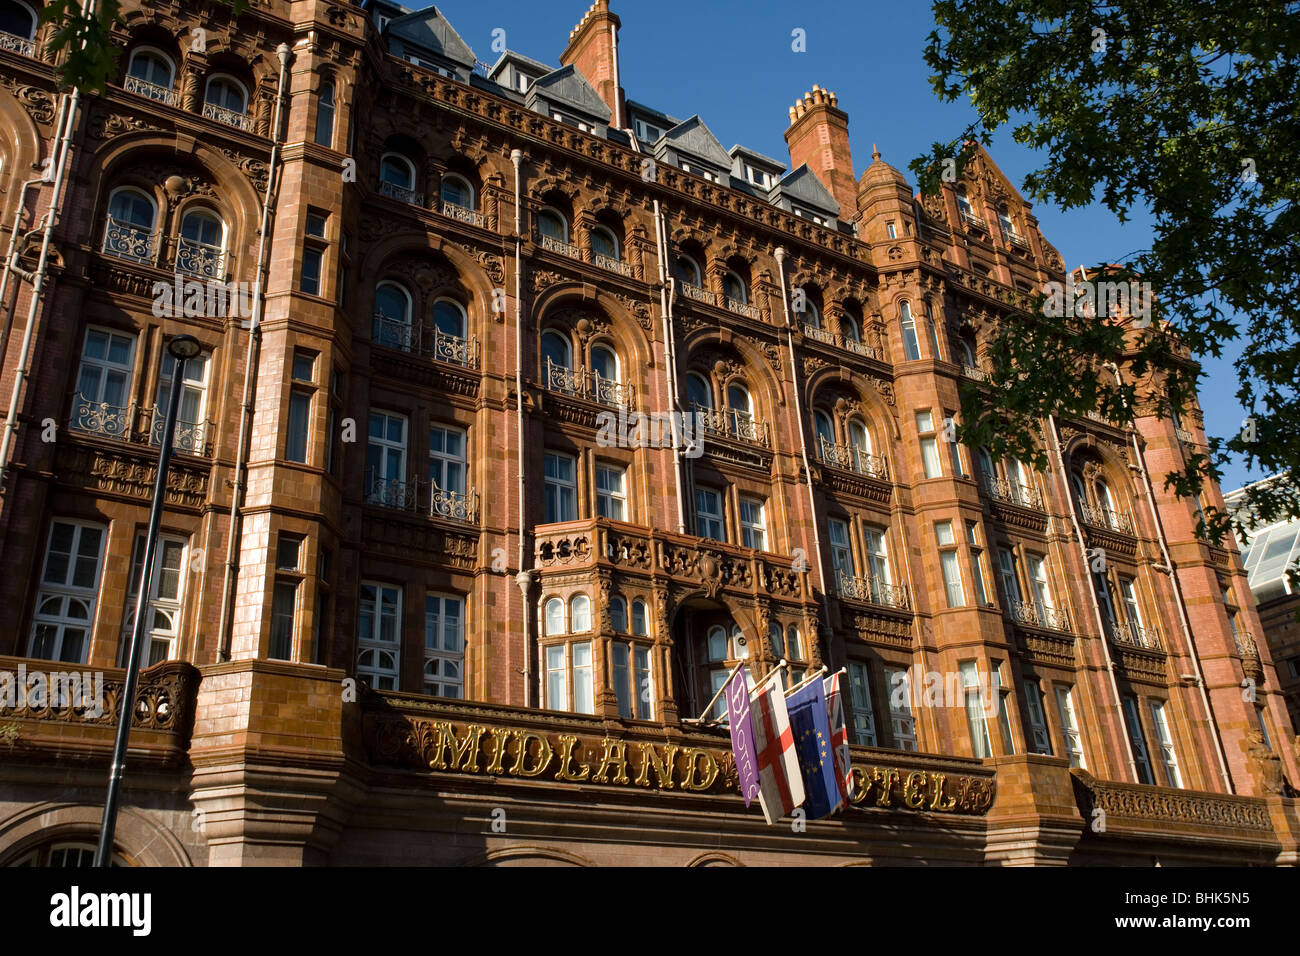 Midland Hotel in Manchester Foto Stock